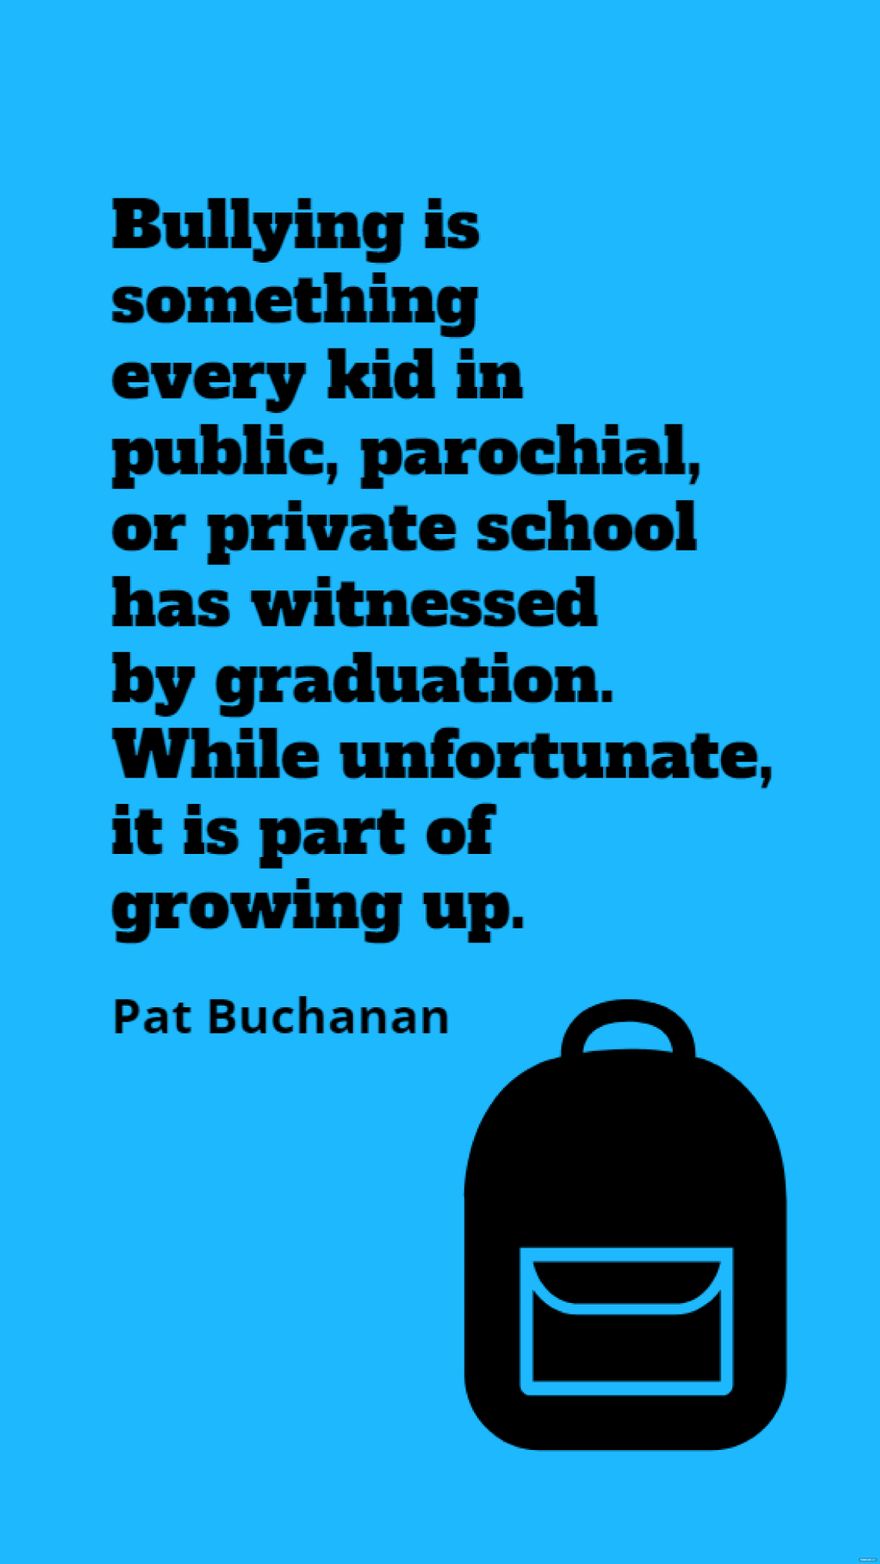 Pat Buchanan - Bullying is something every kid in public, parochial, or private school has witnessed by graduation. While unfortunate, it is part of growing up.